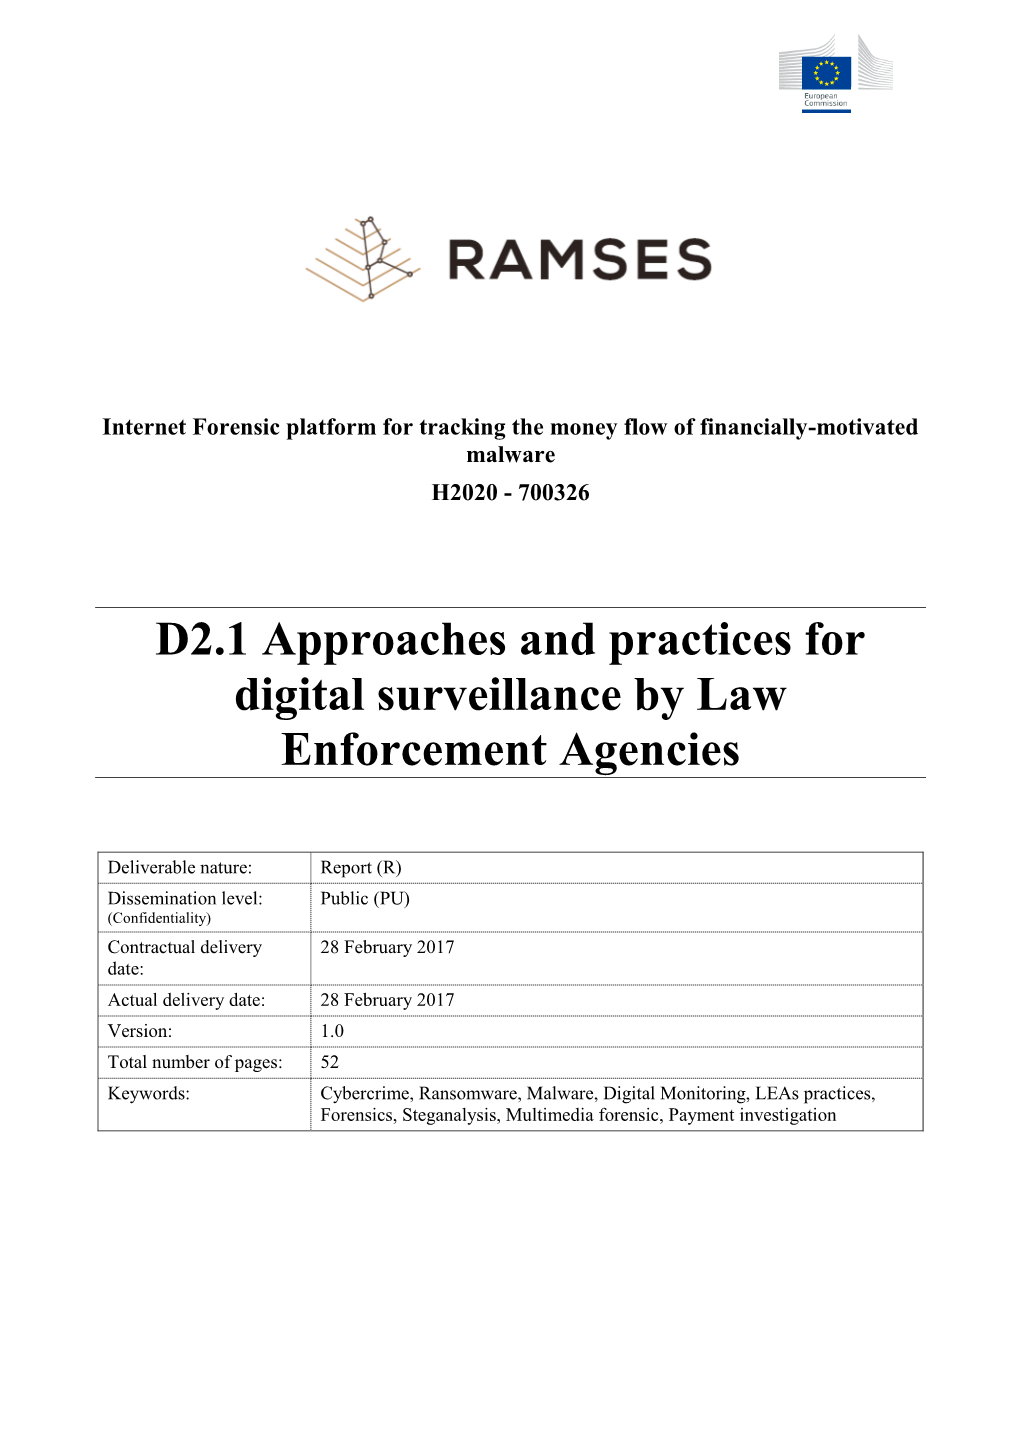 D2.1 Approaches and Practices for Digital Surveillance by Law Enforcement Agencies